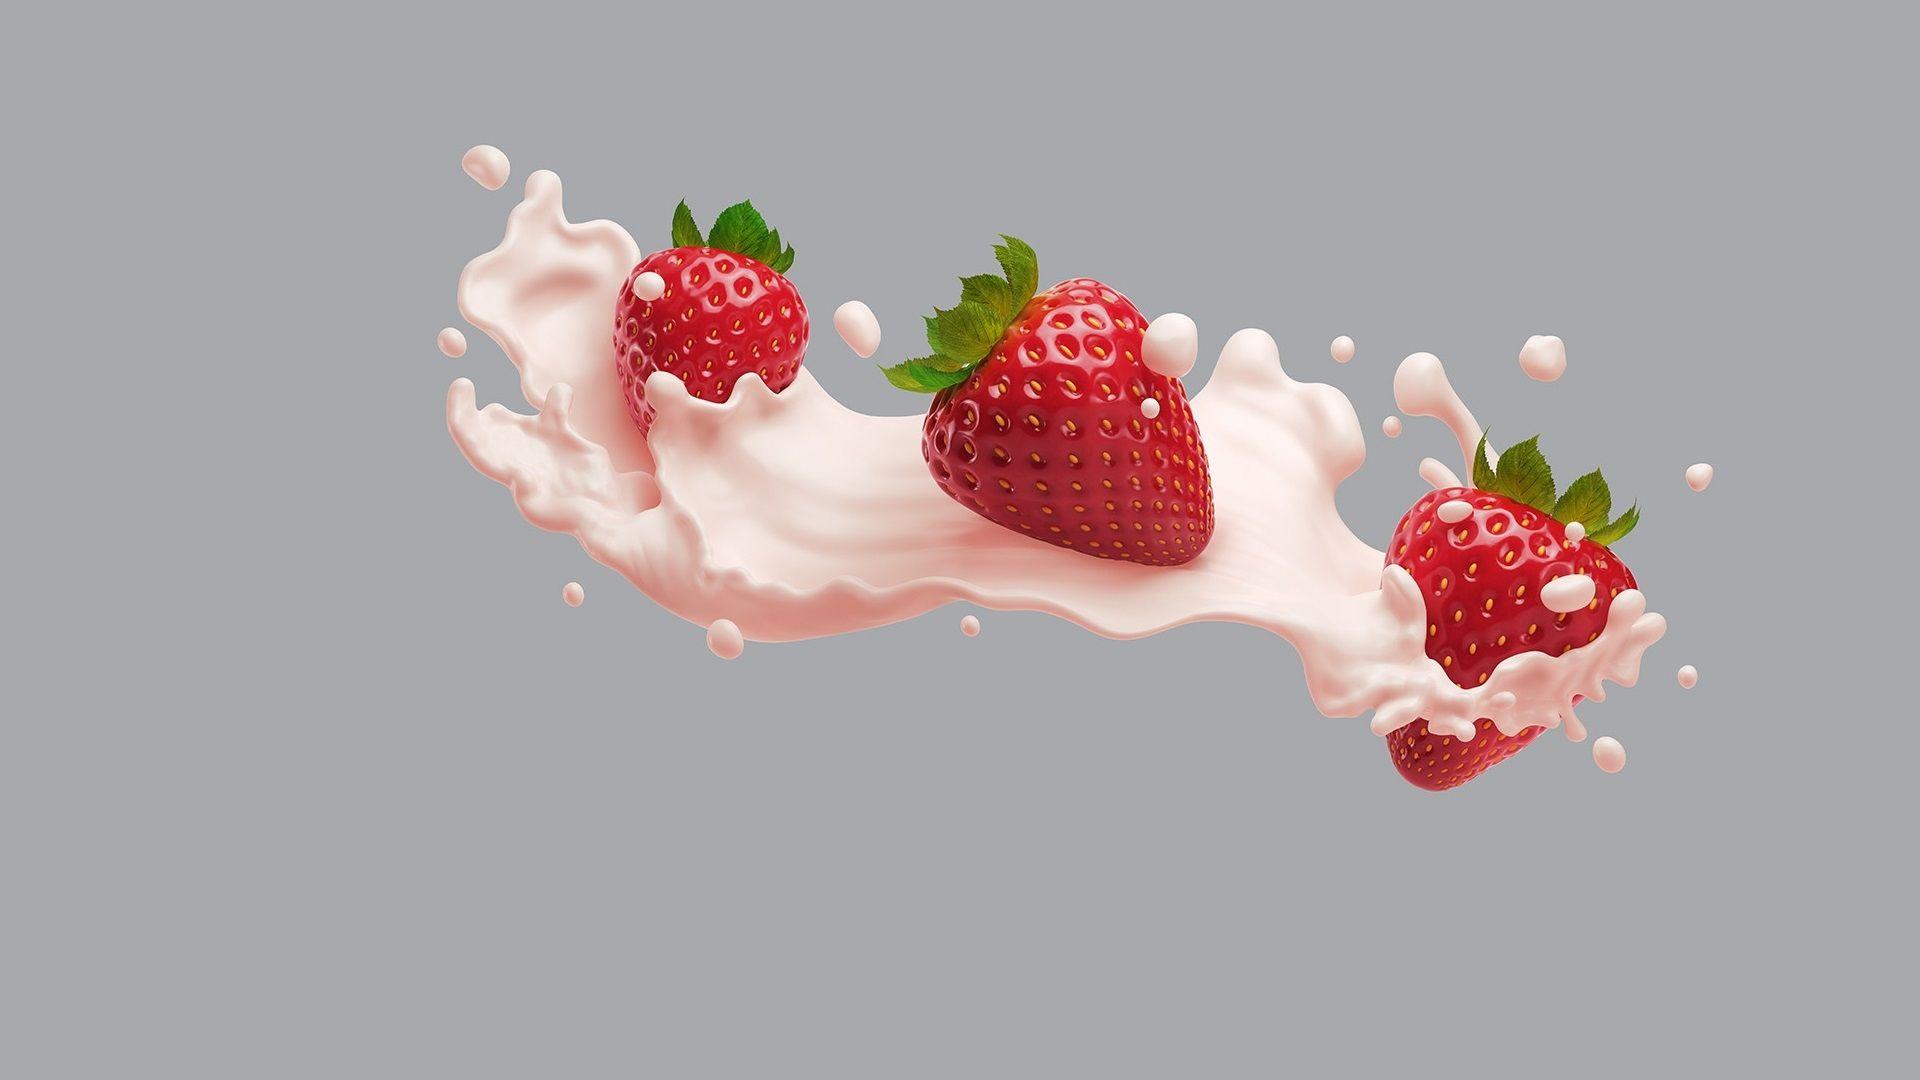 Wallpaper Strawberry, pink milk 1920x1080 Full HD 2K Picture, Image